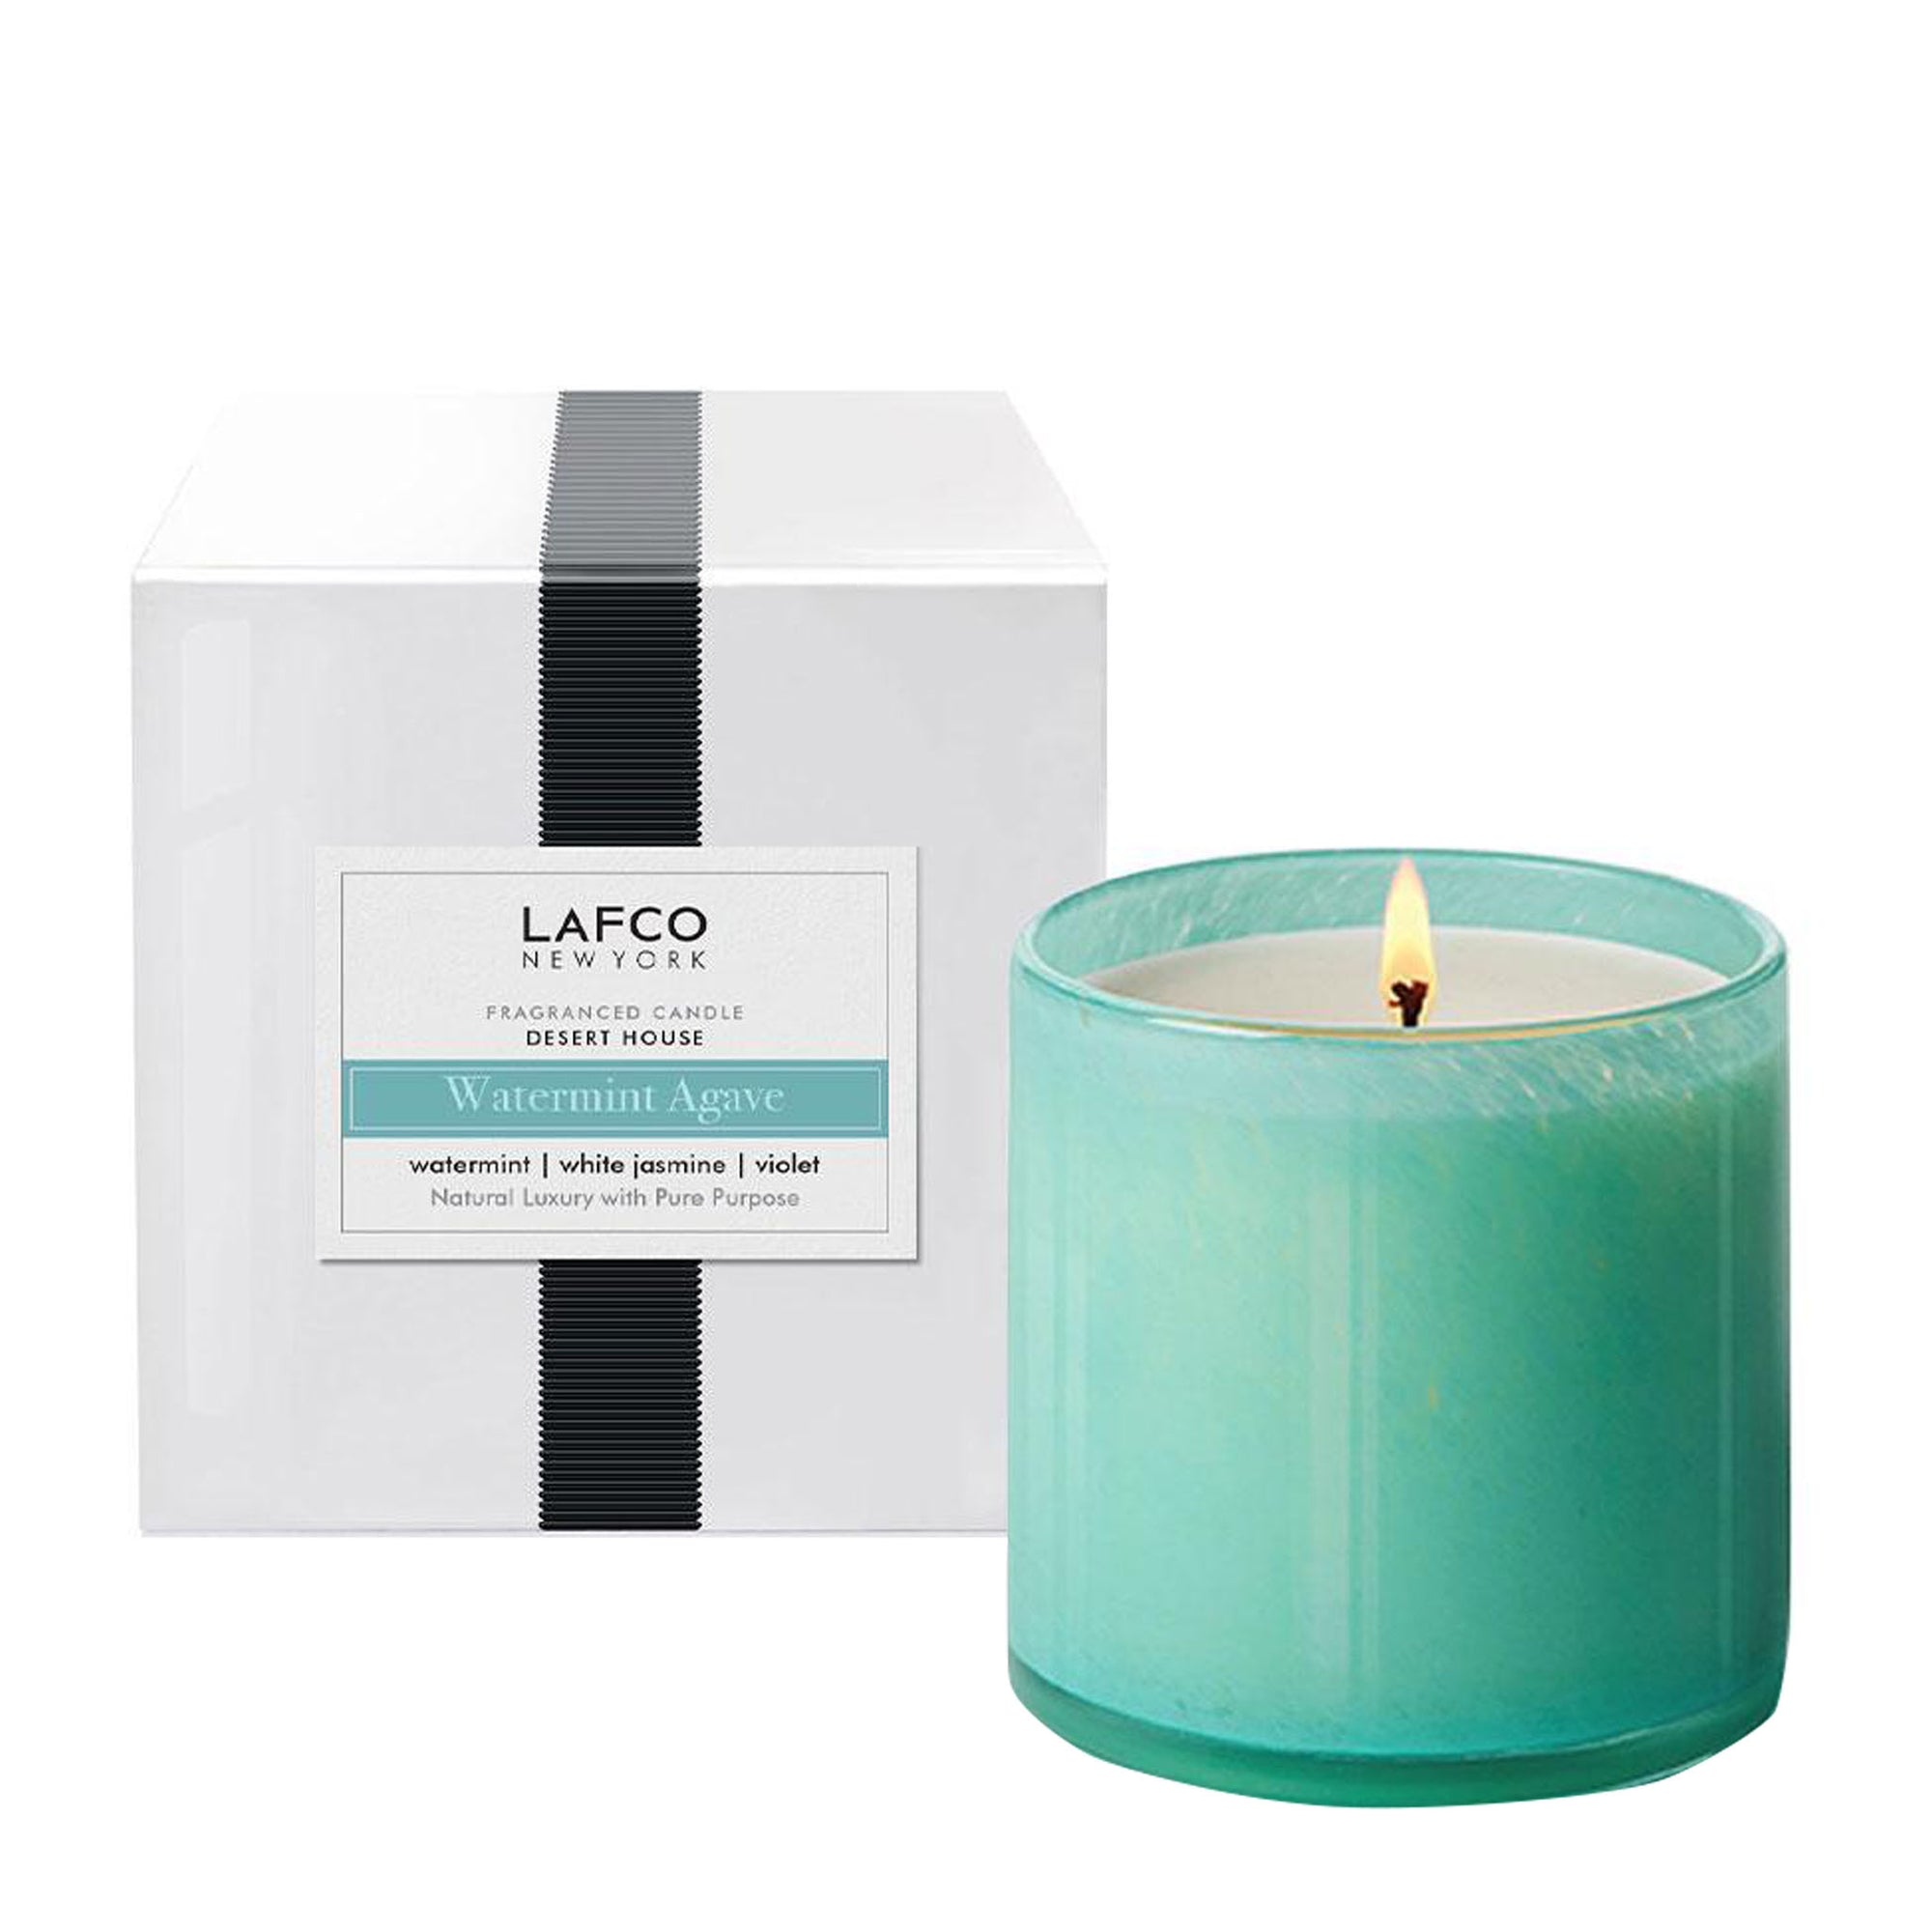 Lafco Desert House | Watermint Agave Candle